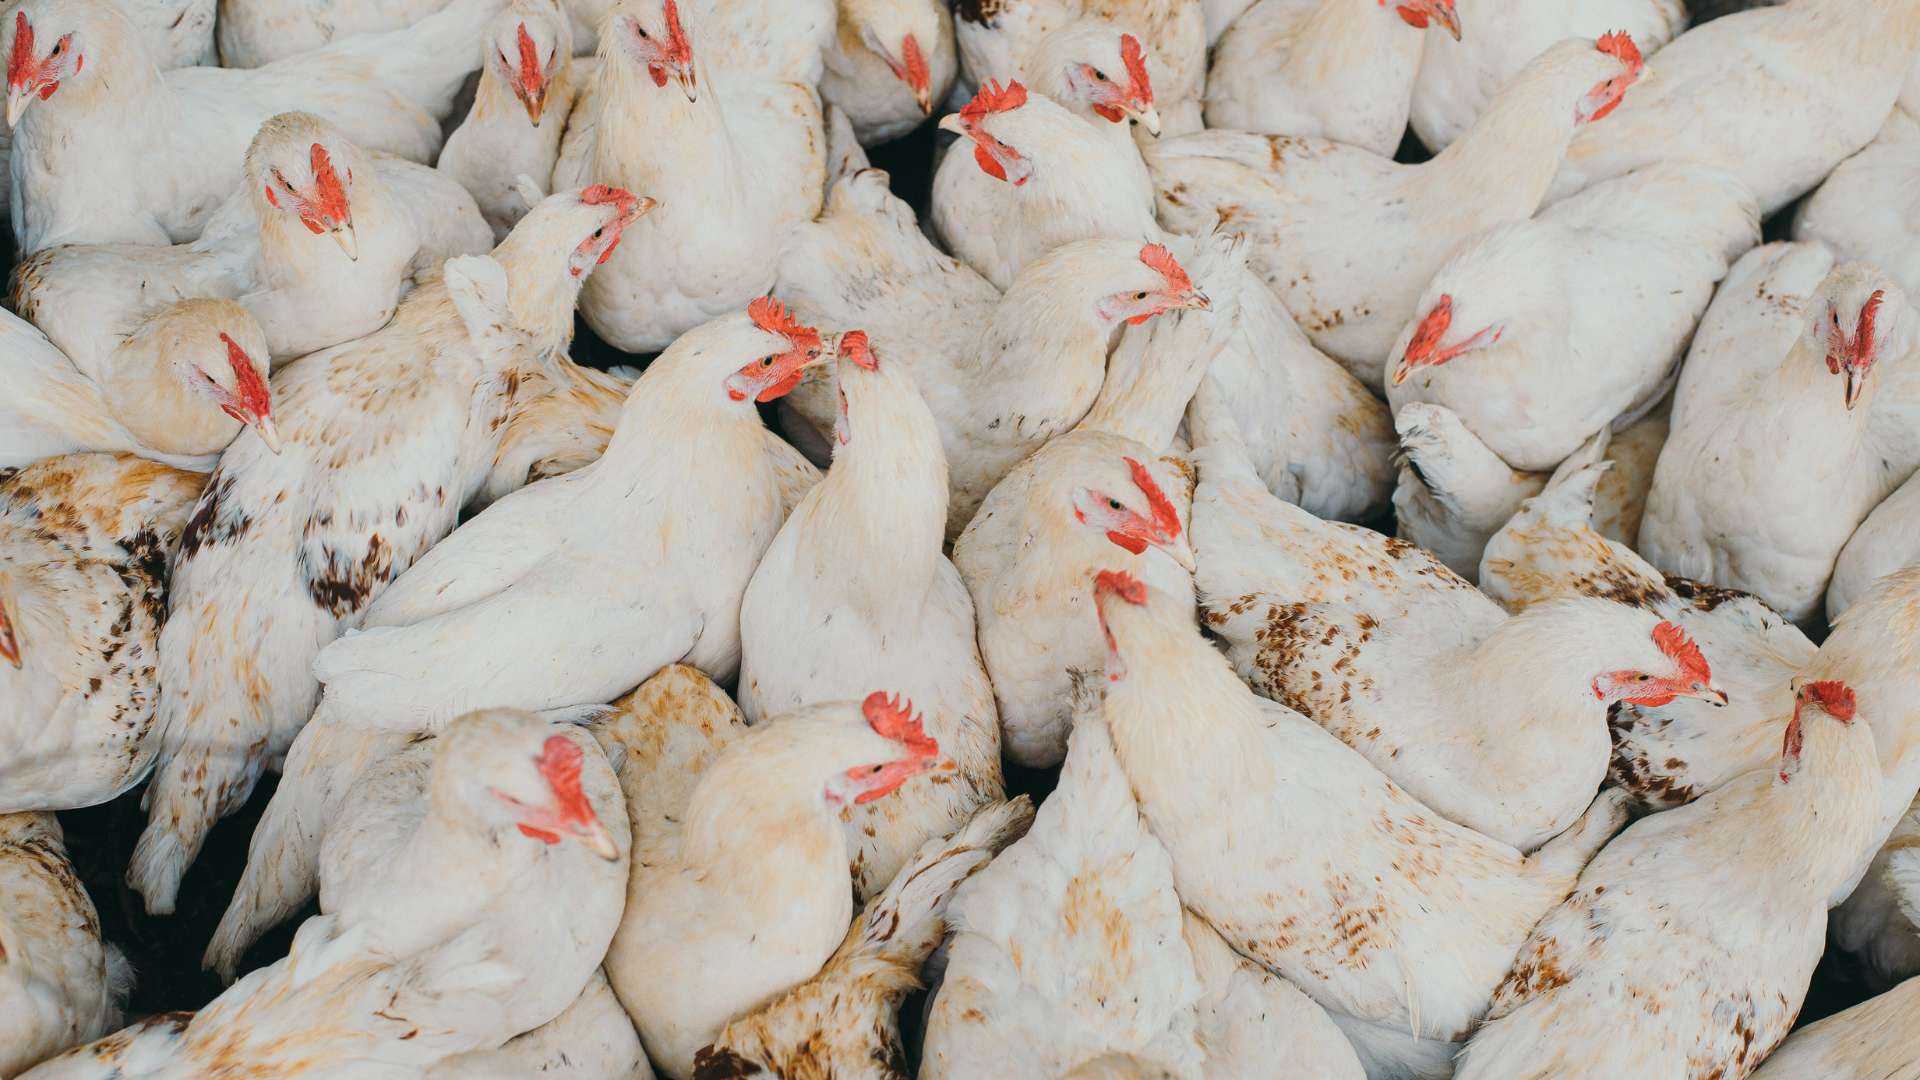 A group of commercially raised chickens - a problem for biosecurity in poultry